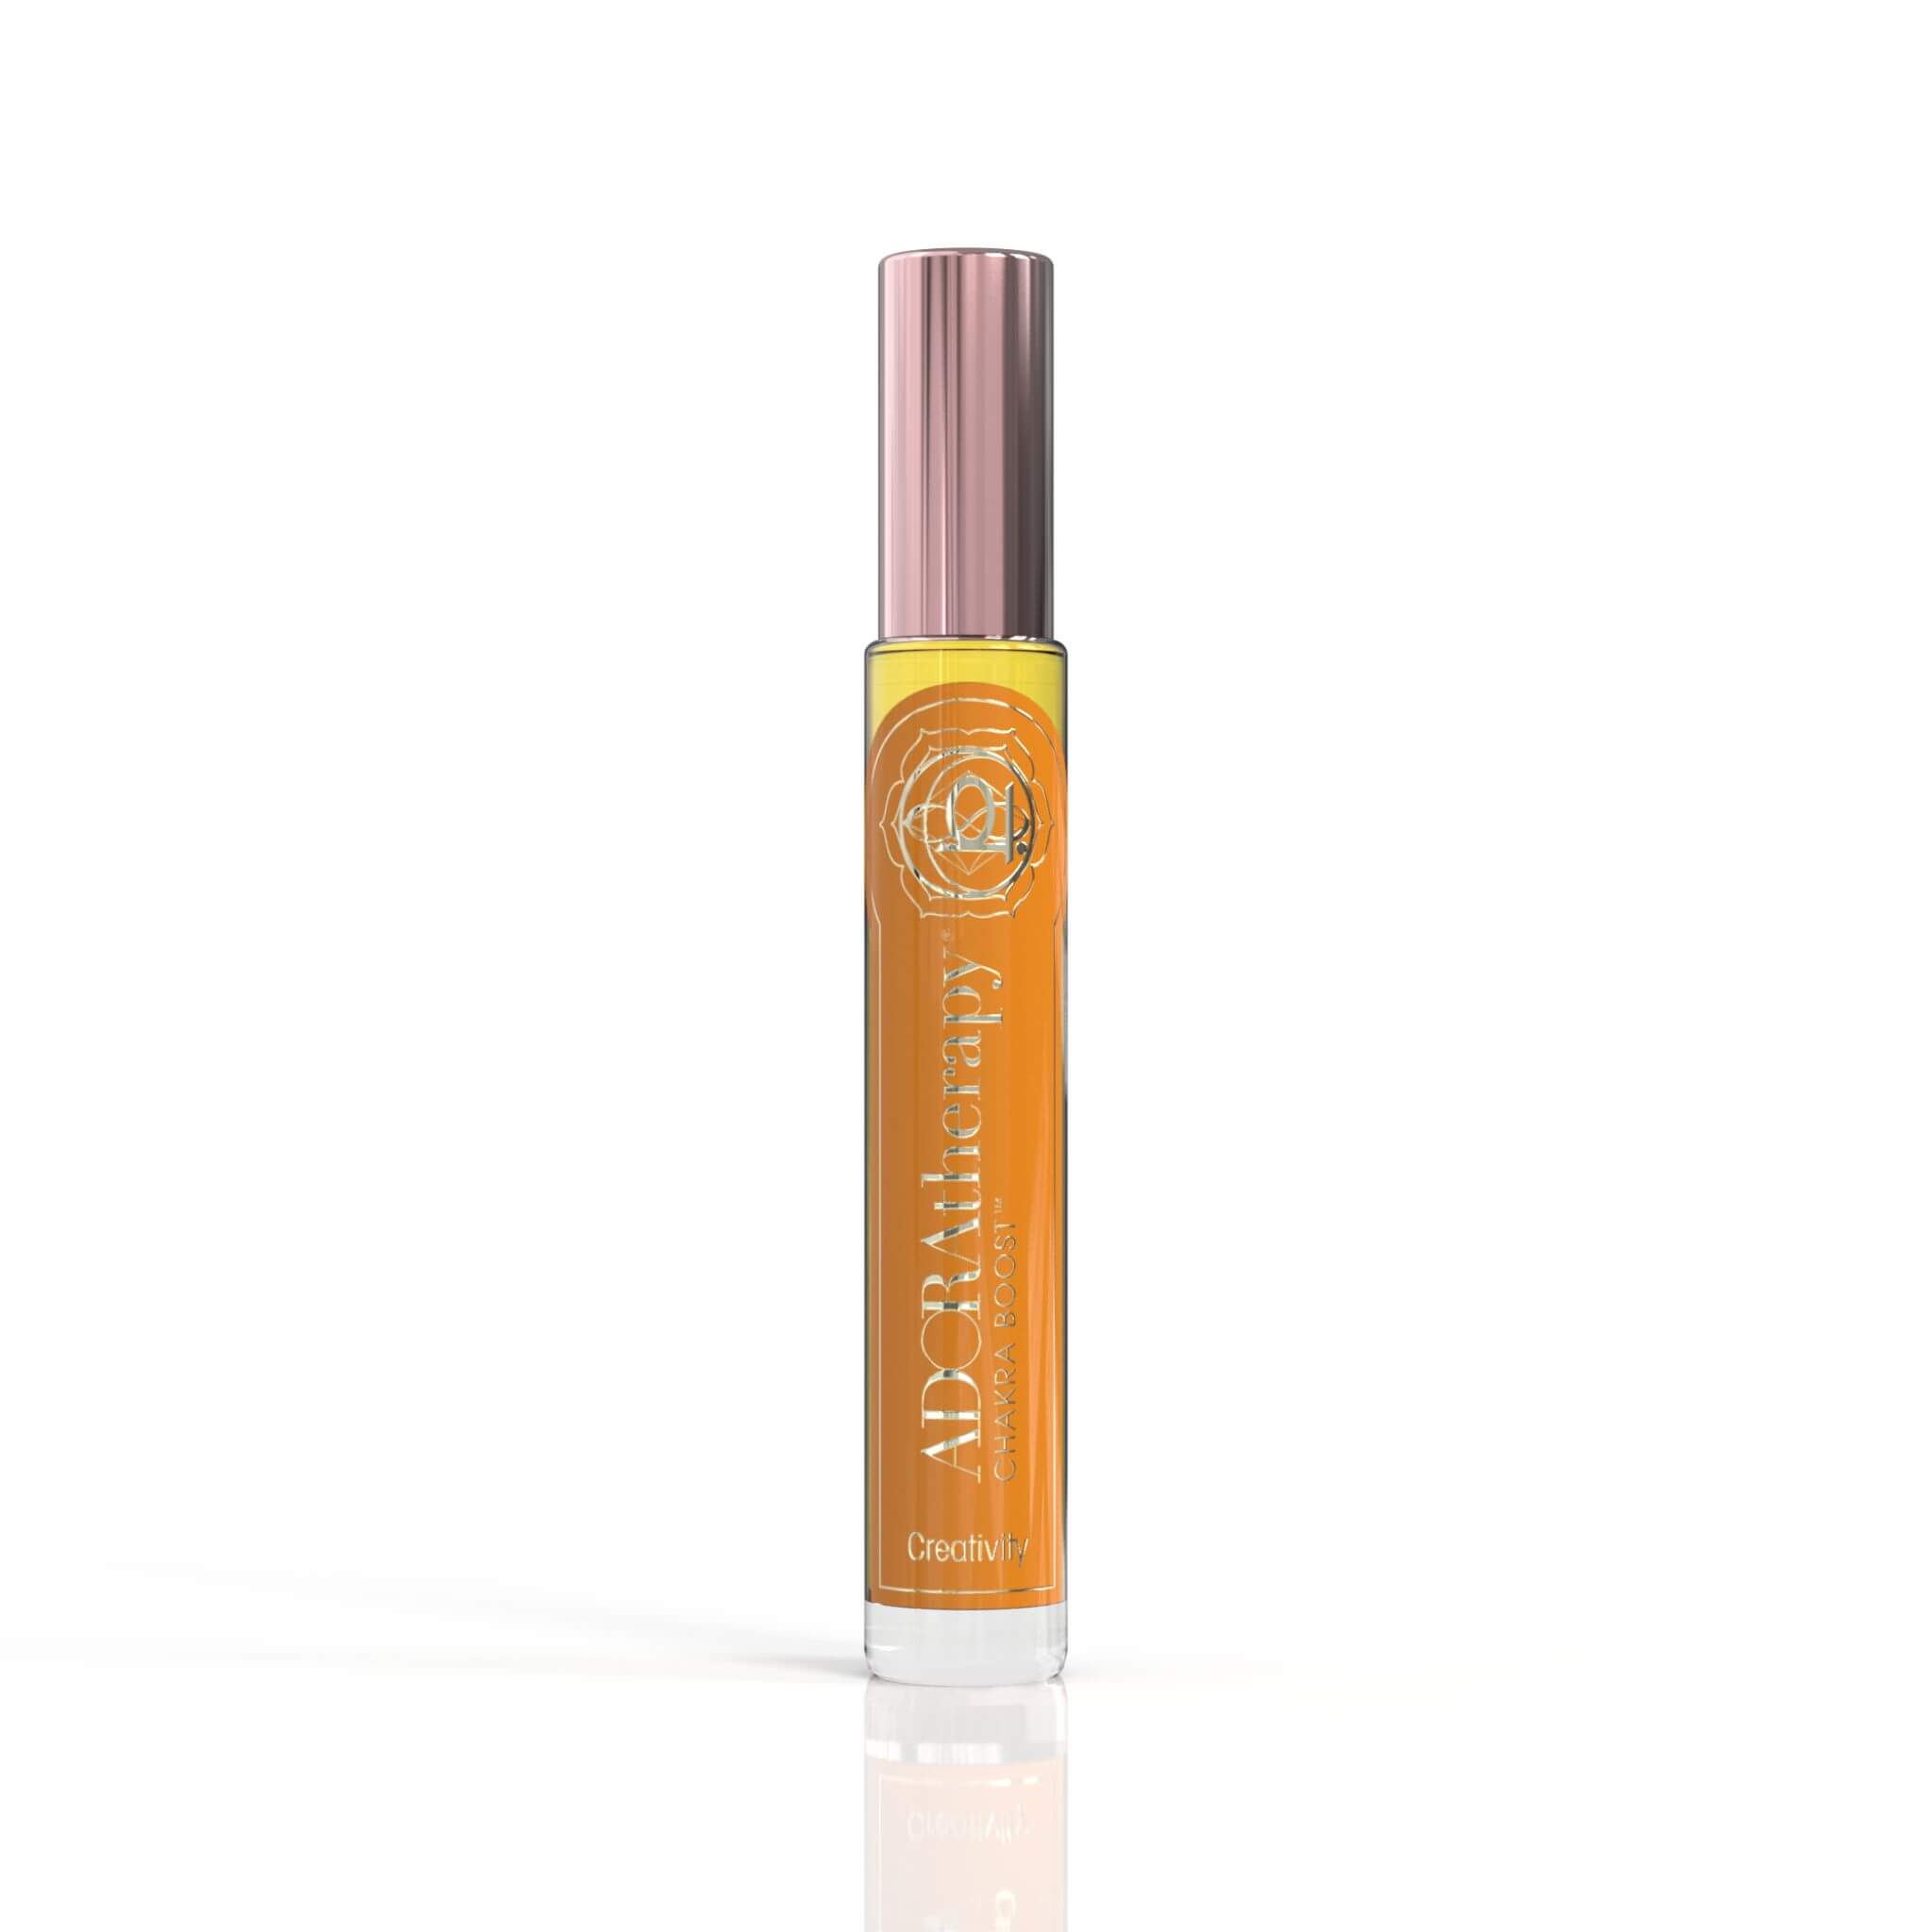 Chakra 2 Creativity Roll  On Perfume  Oil by ADORAtherapy